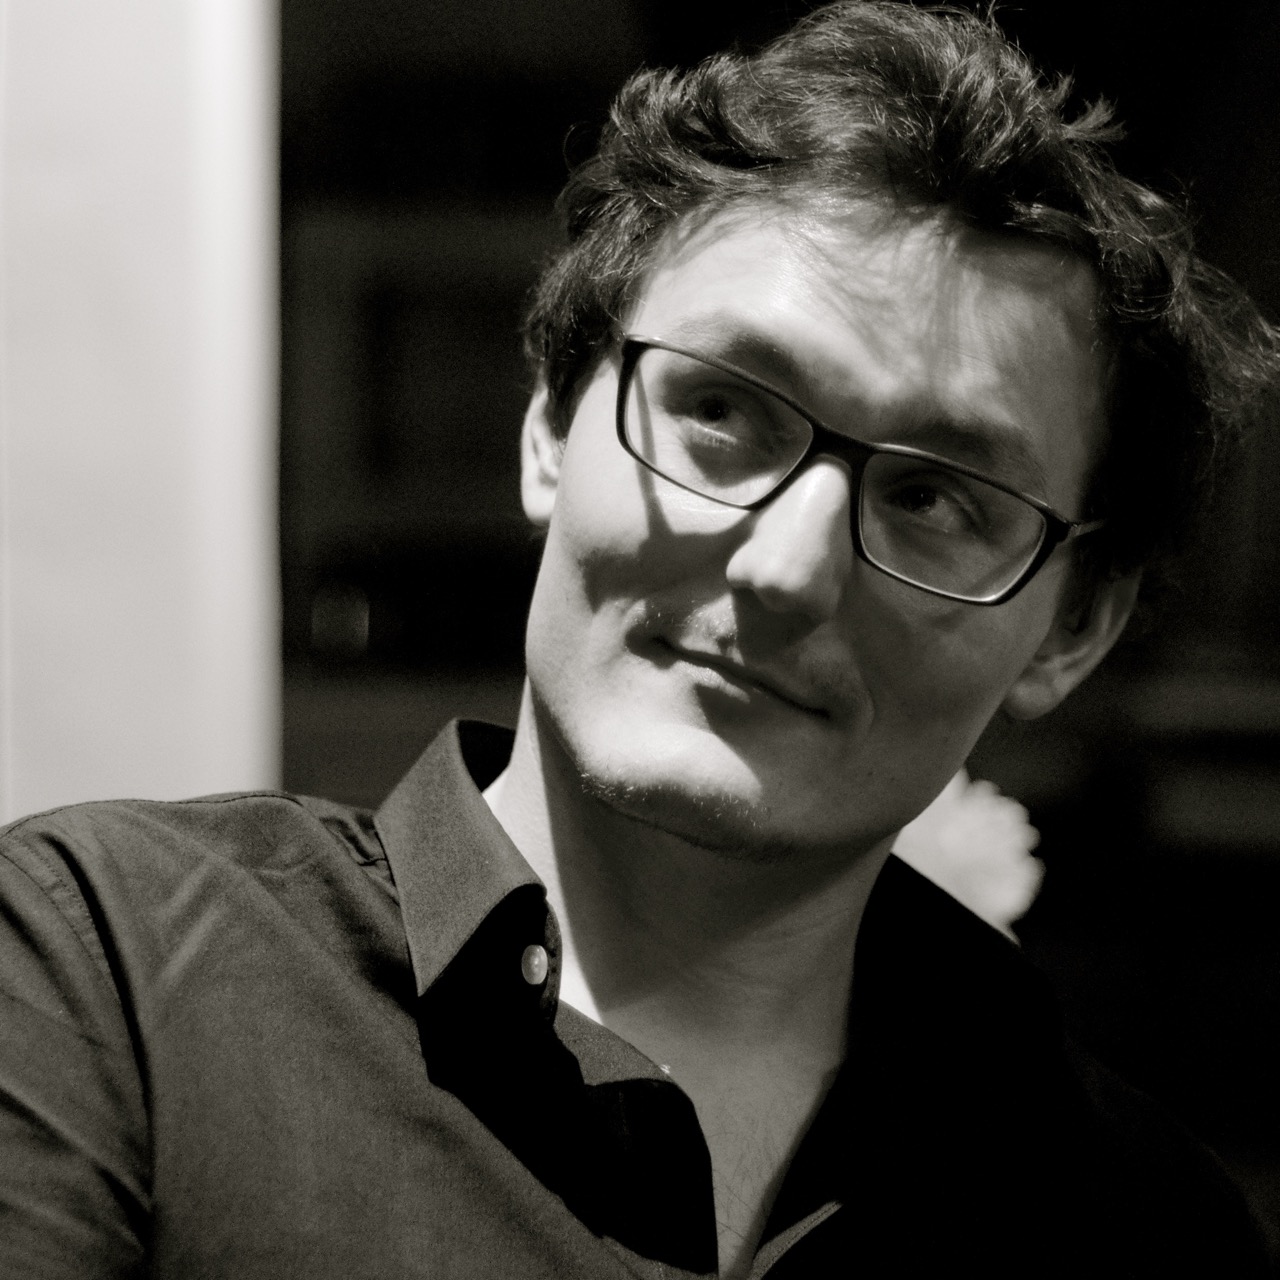 Alexander Decommere, March 2015.